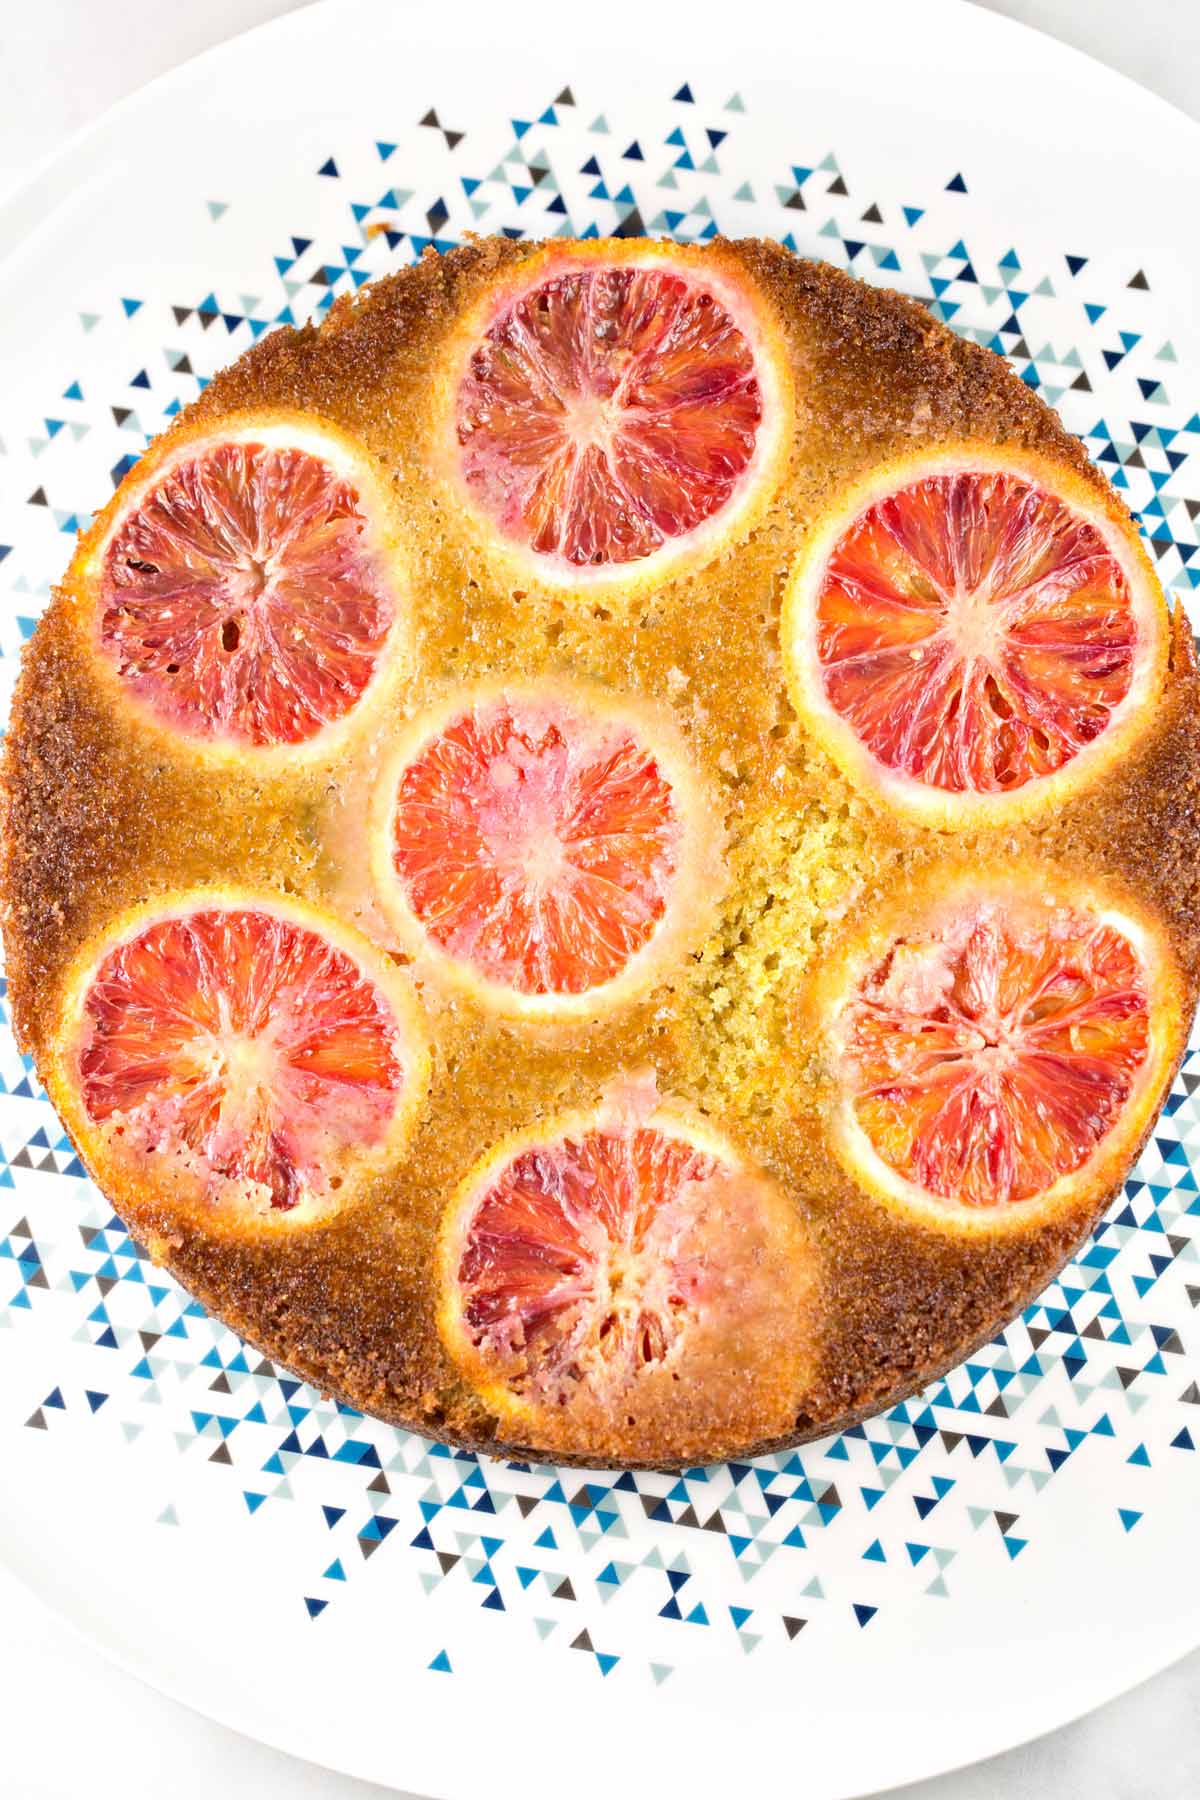 olive oil cake covered with rounds of blood oranges